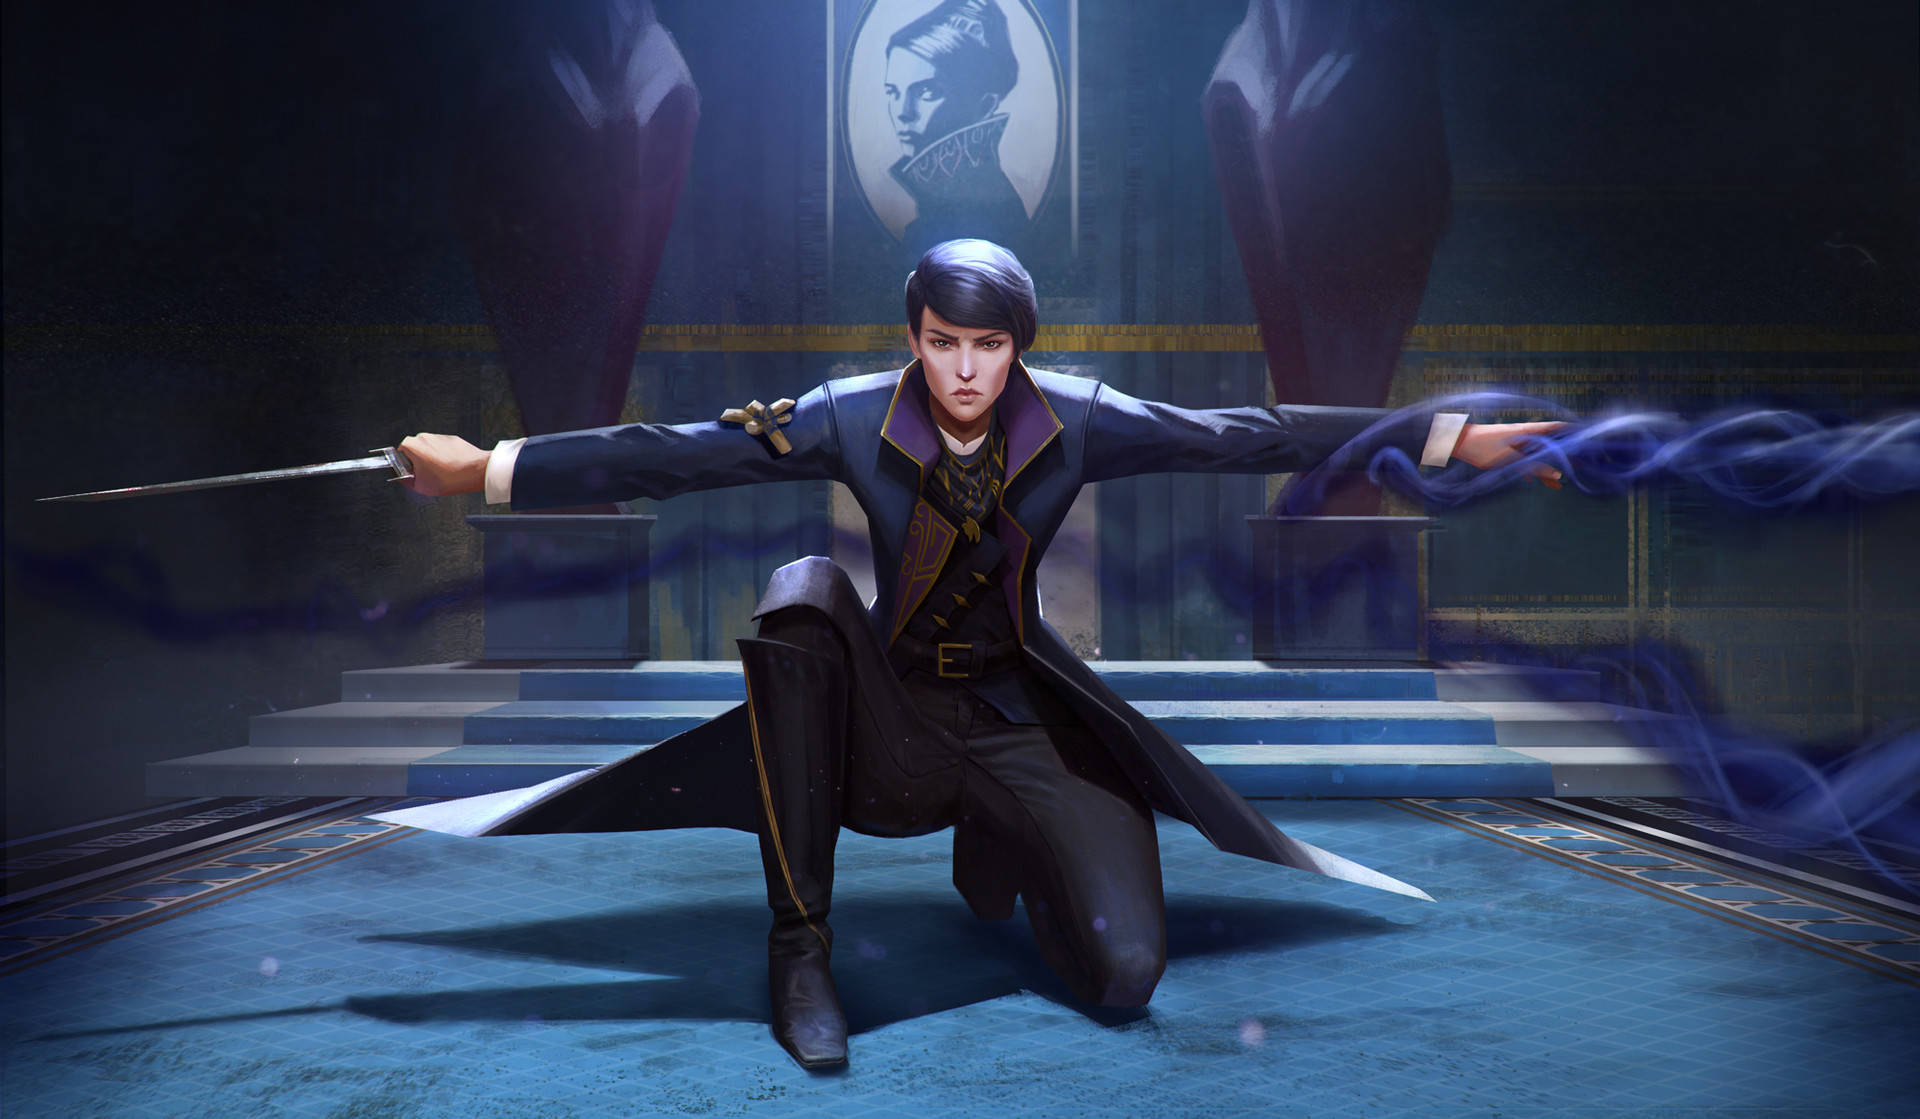 Dishonored 2 Emily Kaldwin In Throne Room Wallpaper